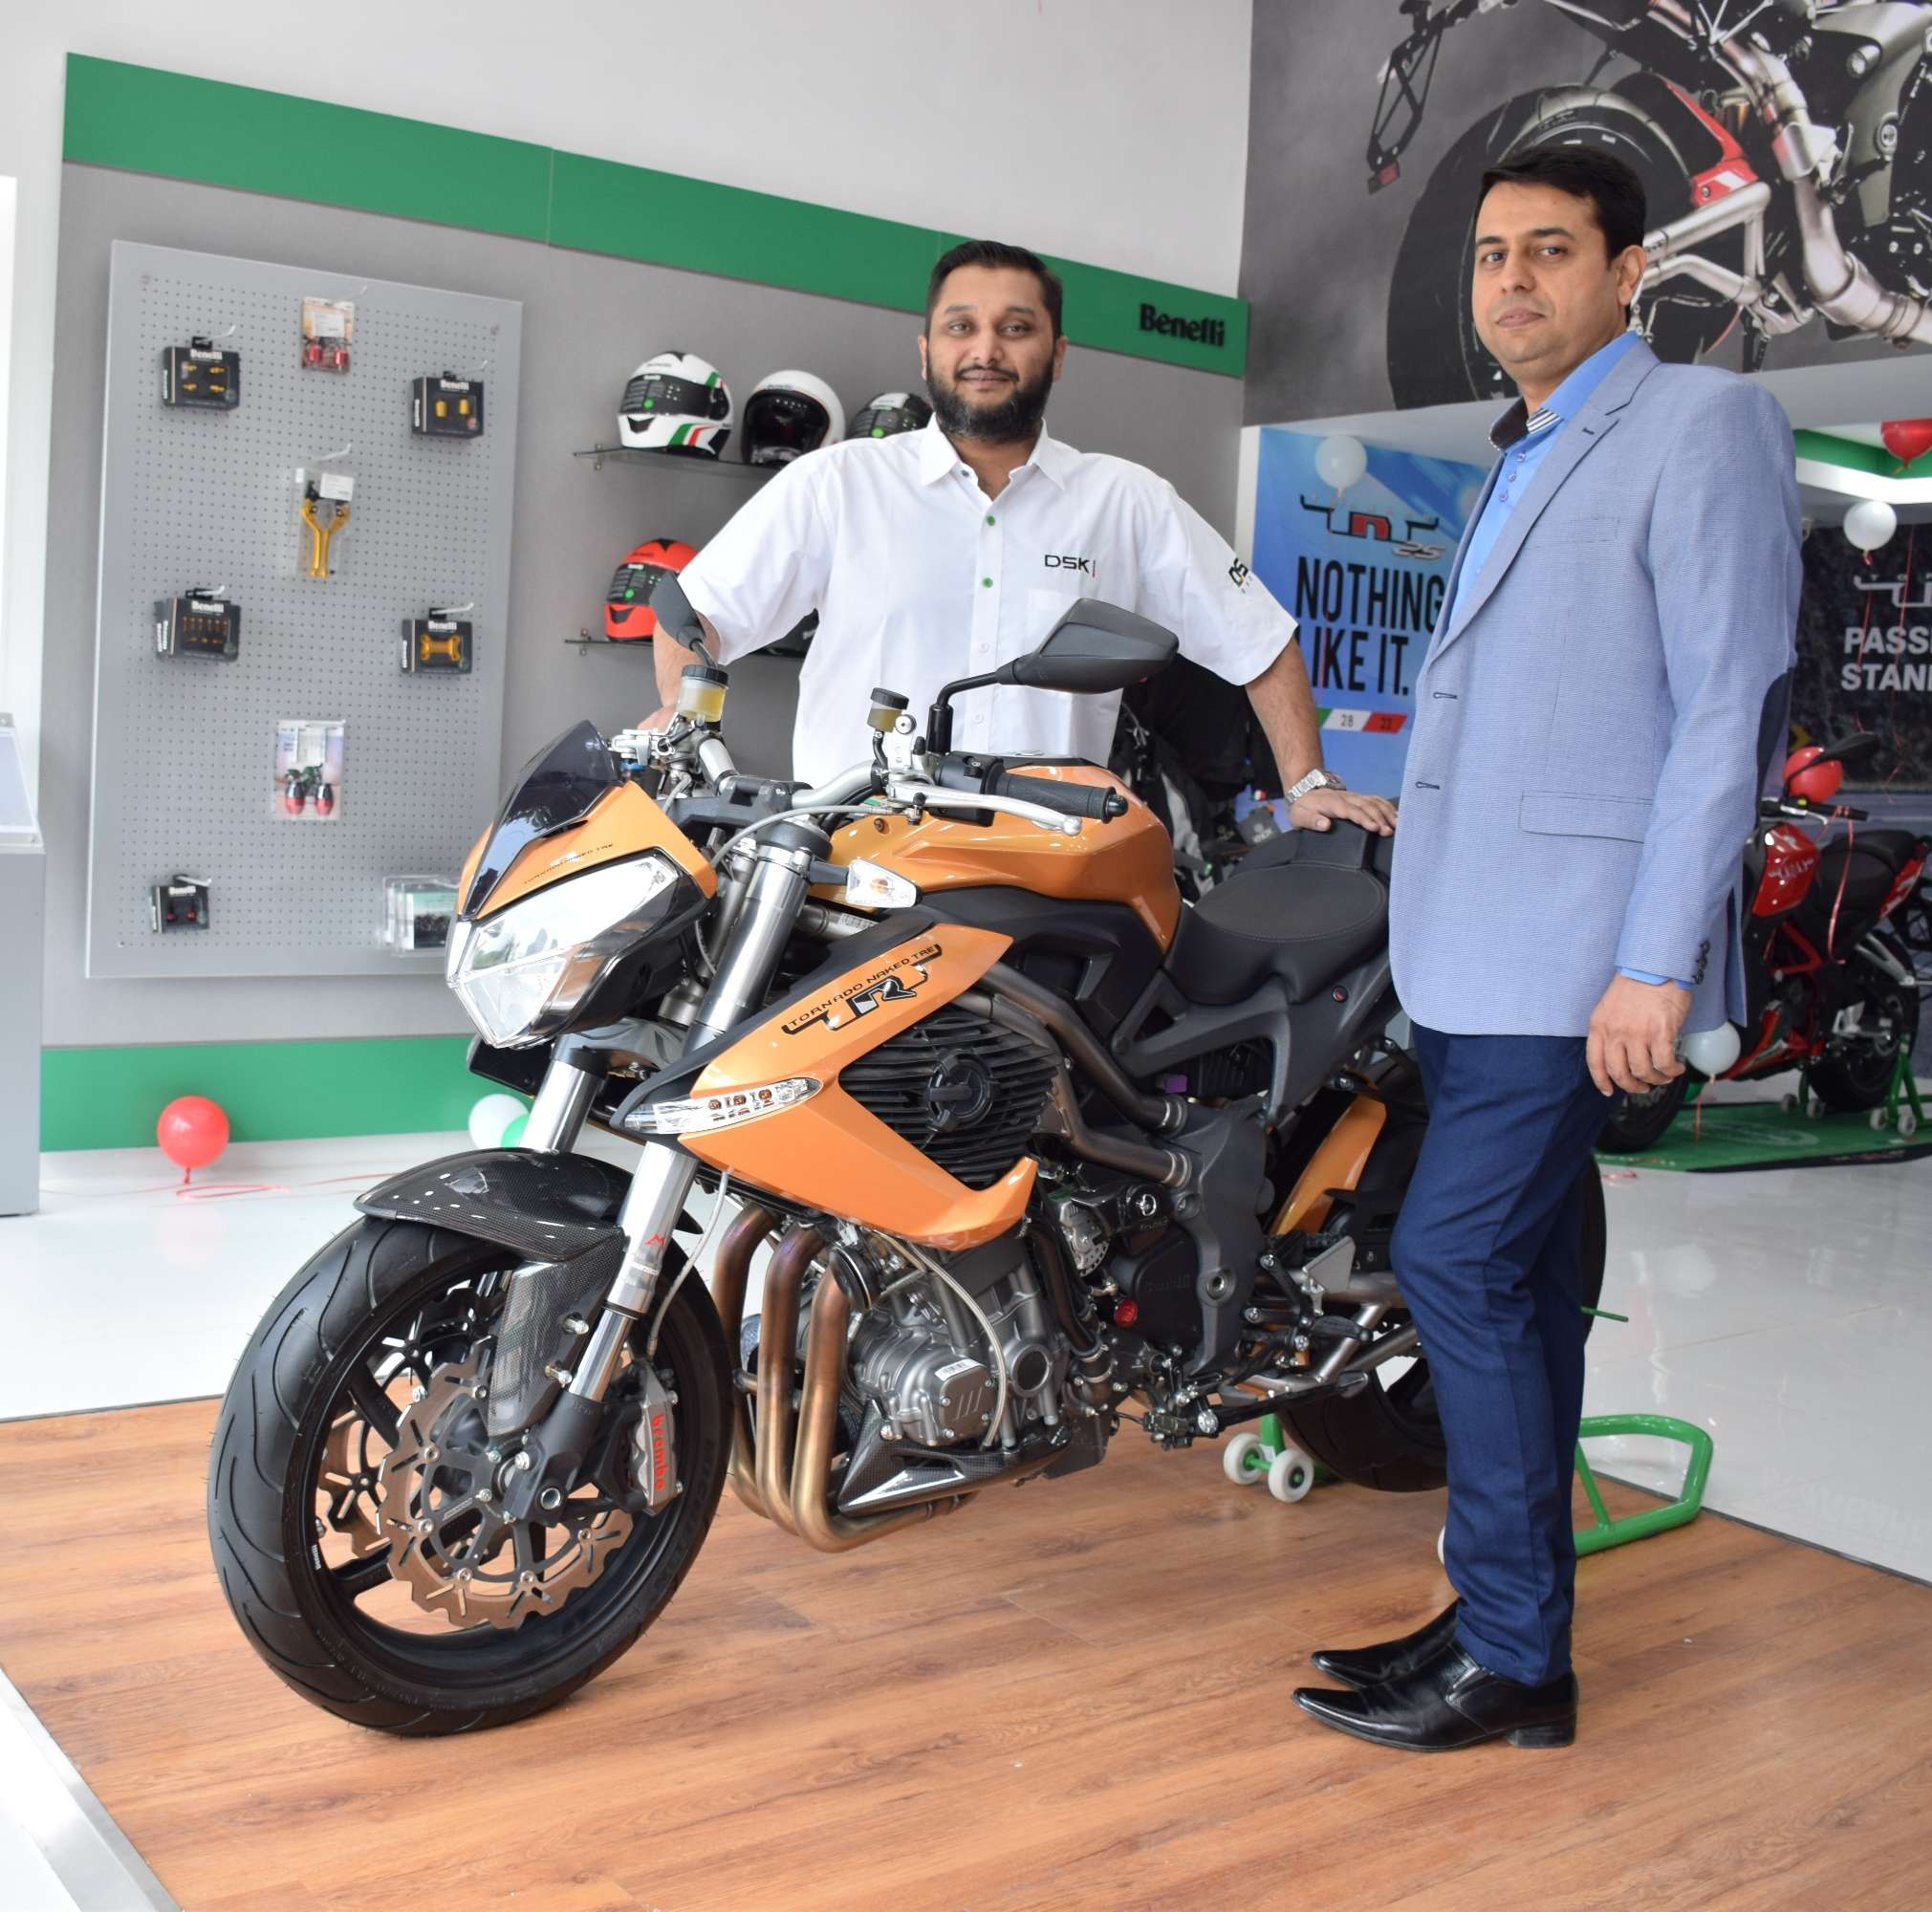 benelli showroom near by me